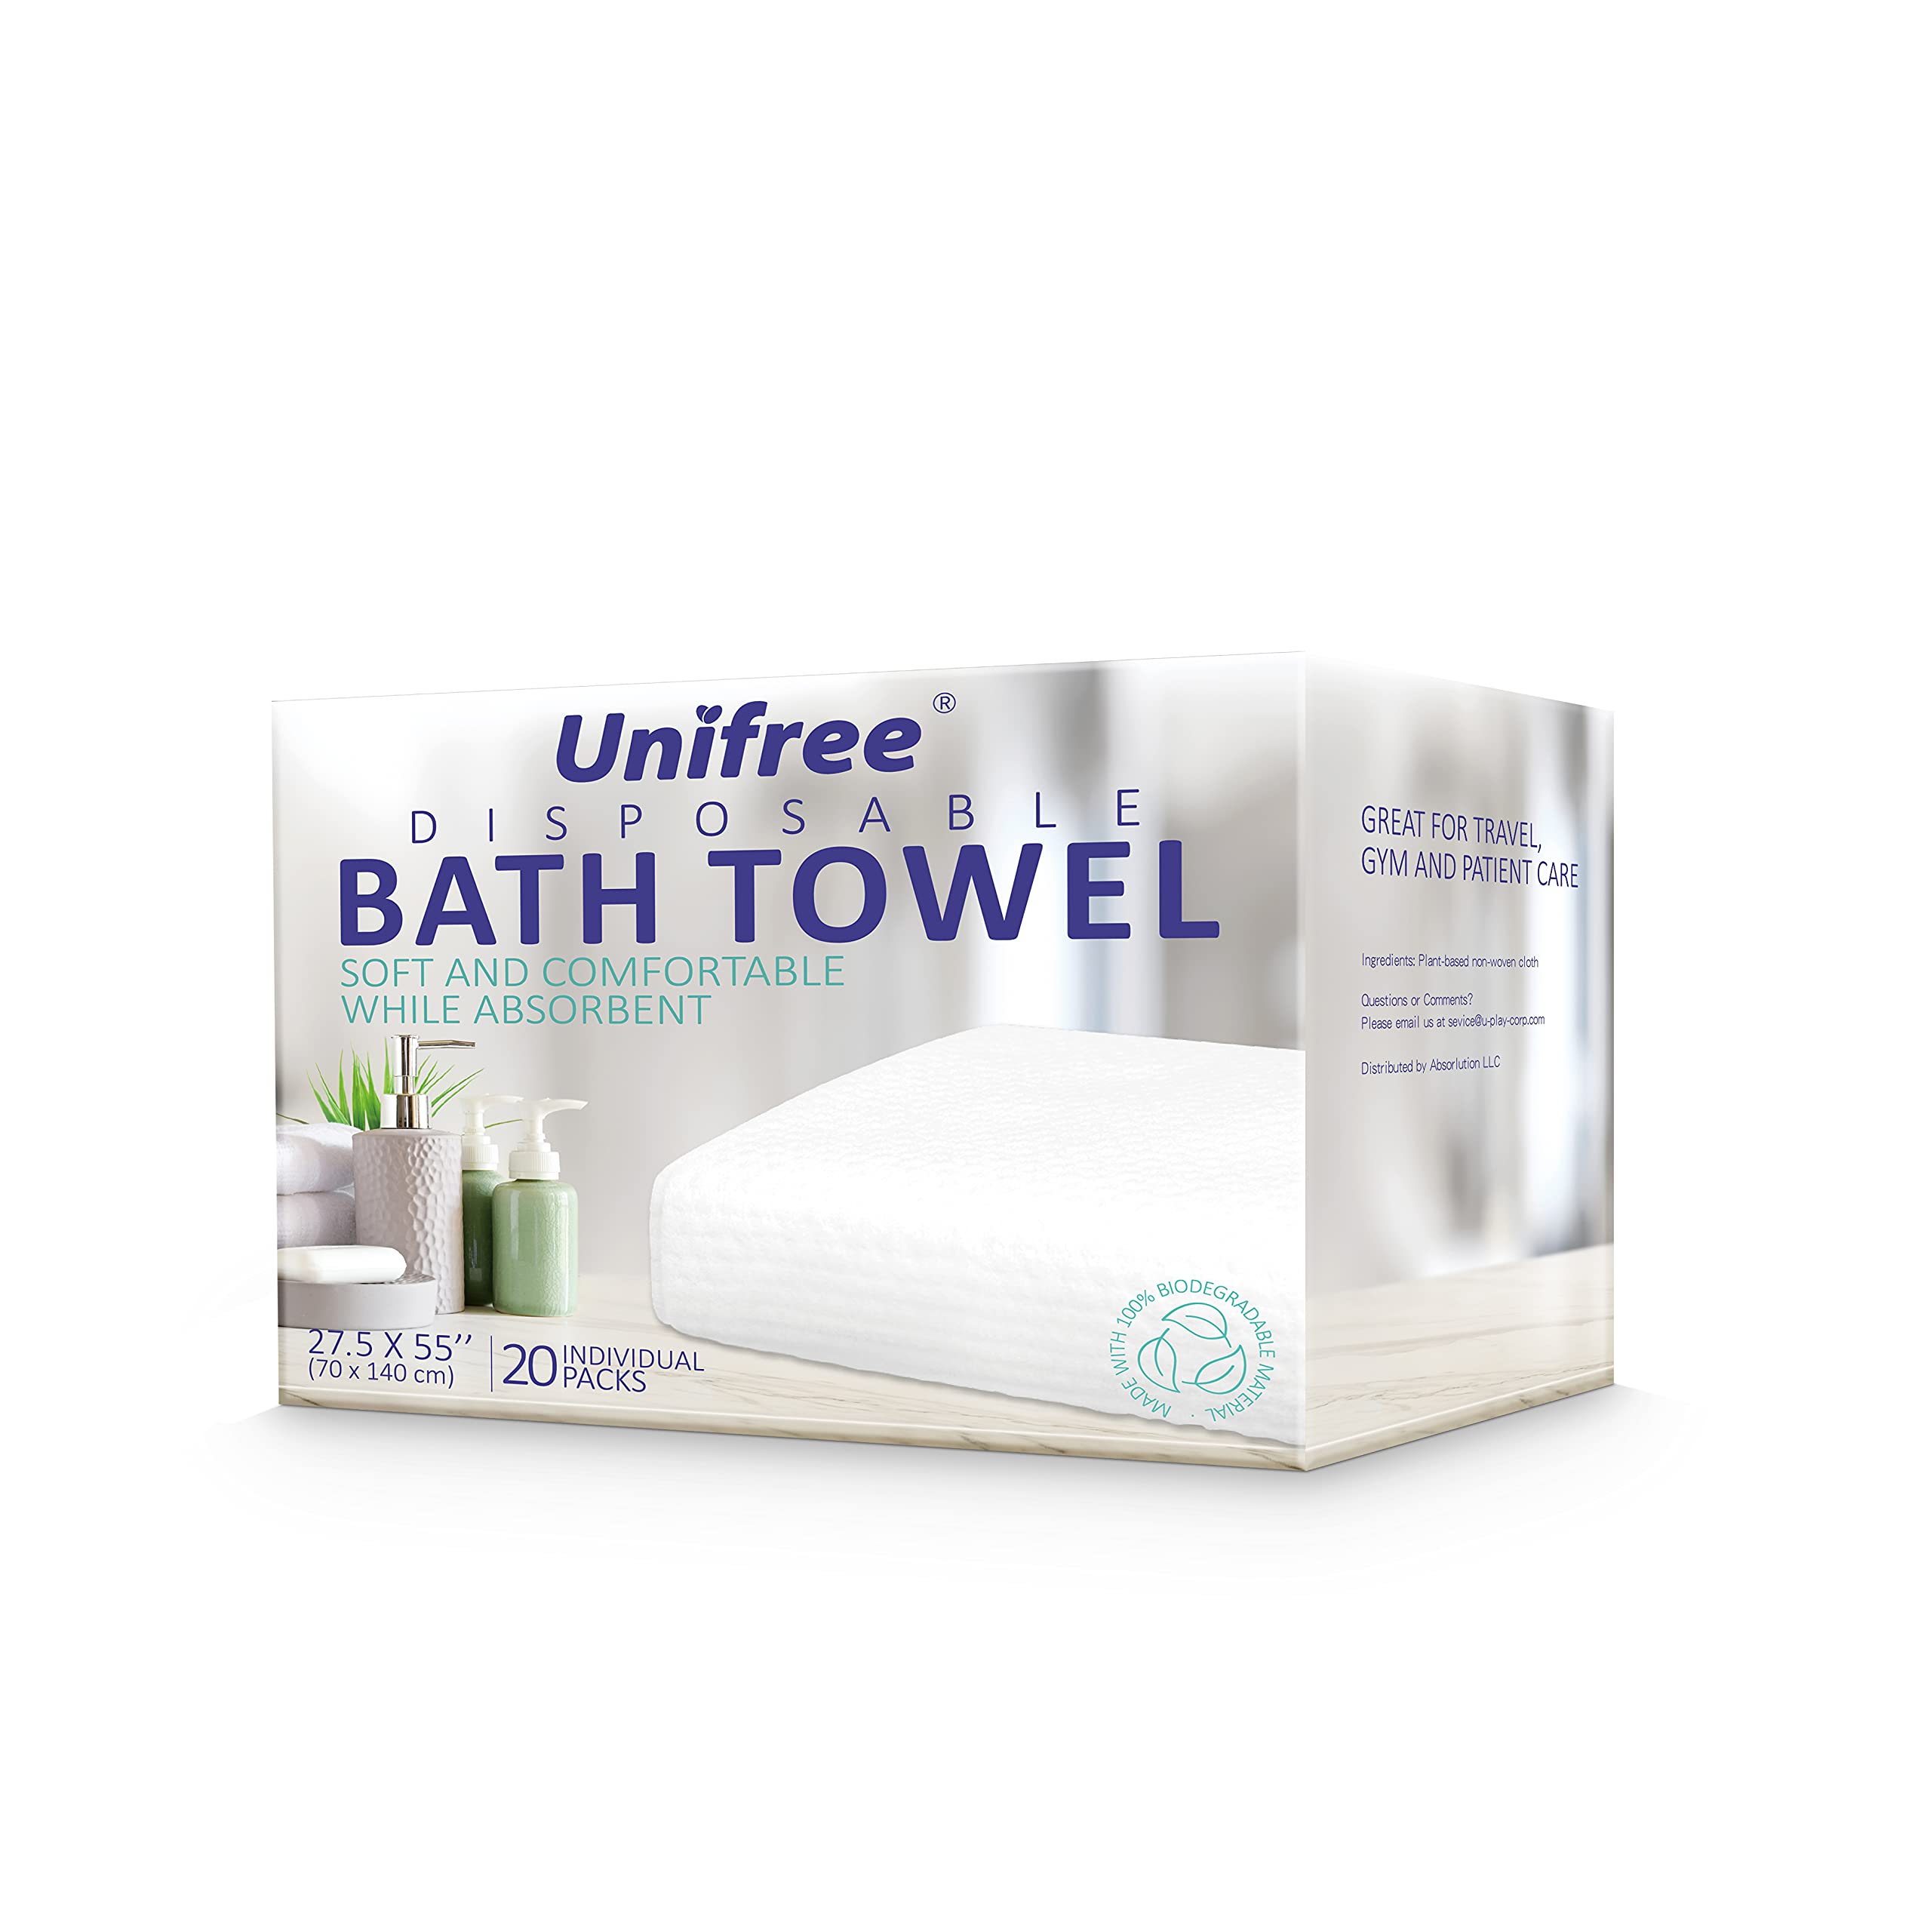 UNIFREE Disposable Bath Towels 丨Camping Towel I Gym Towel I Barber Towel 20 Count, Individually Packed, Large Size 27.5 by 55 inches (27.5“x55”)